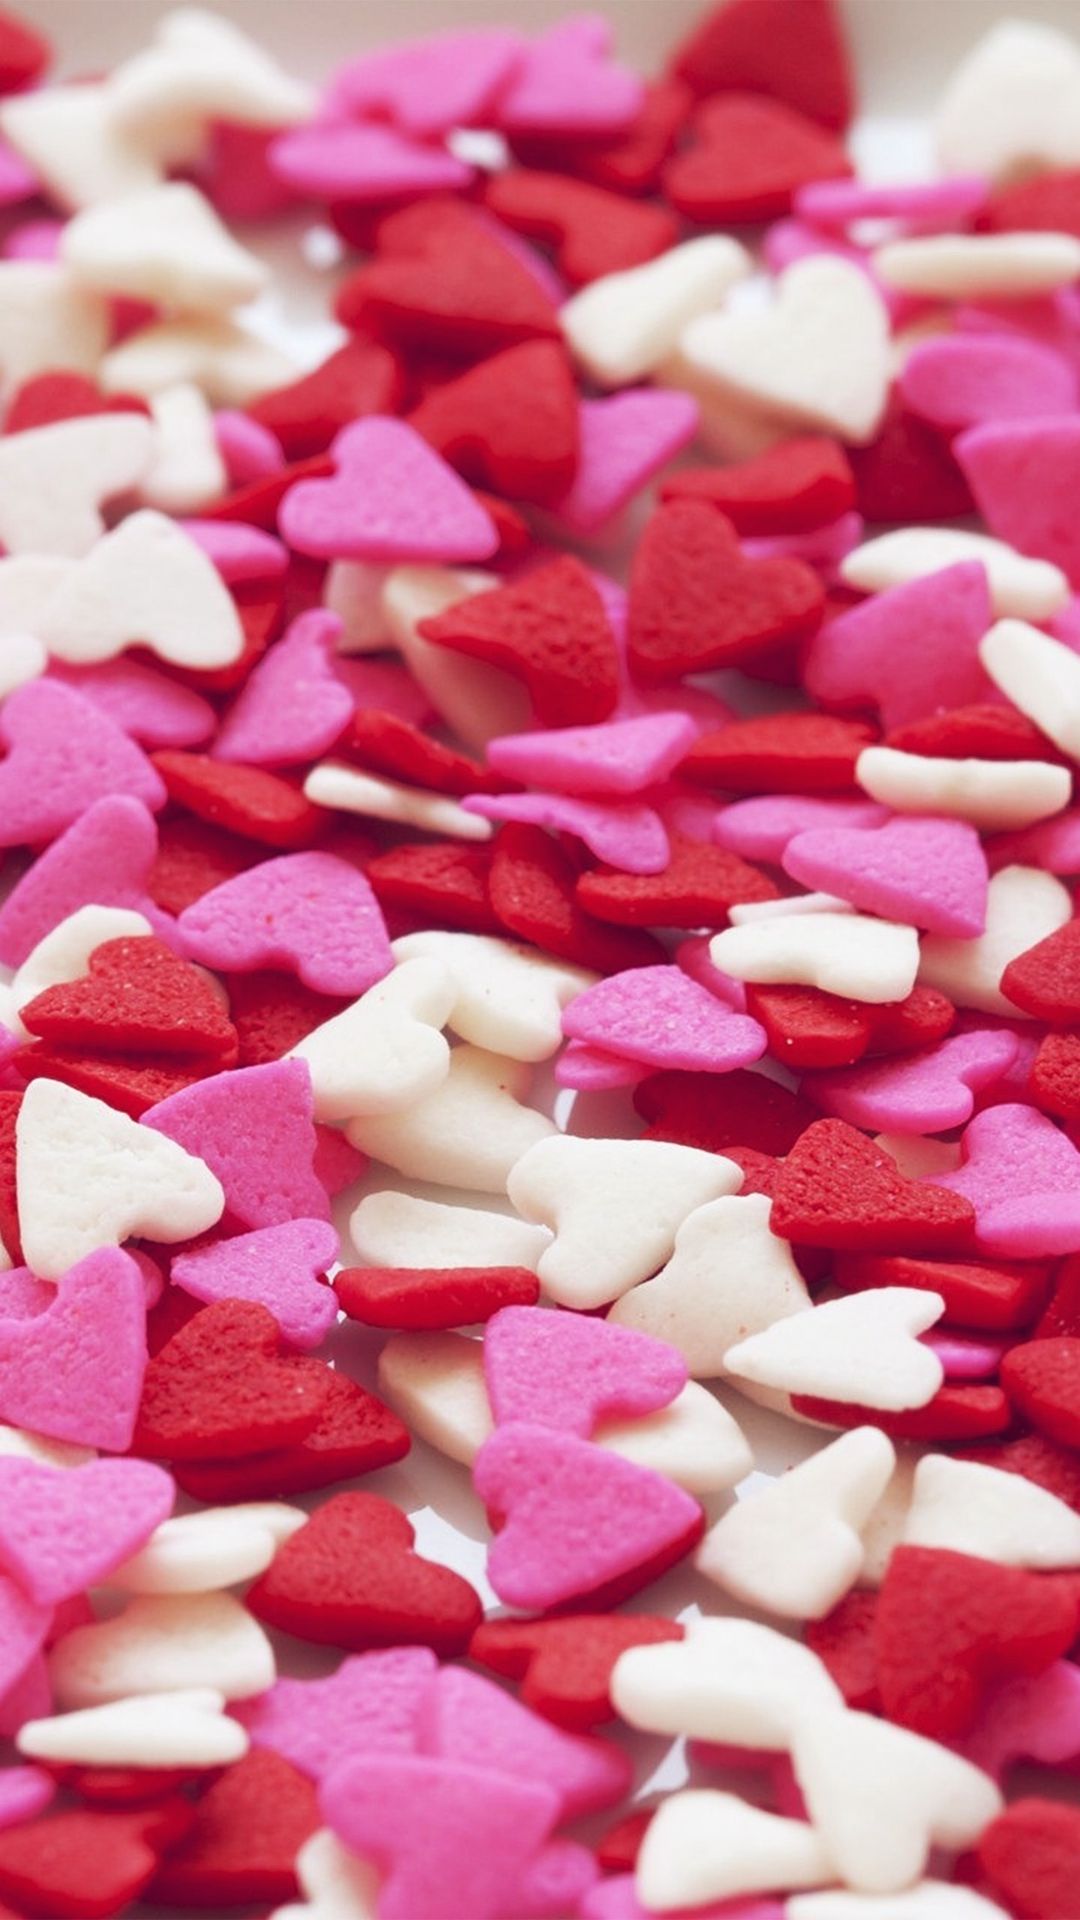 Heart Candy Red Illustration Art #iPhone #wallpaper. Red candy, Heart sprinkles, Nutrition